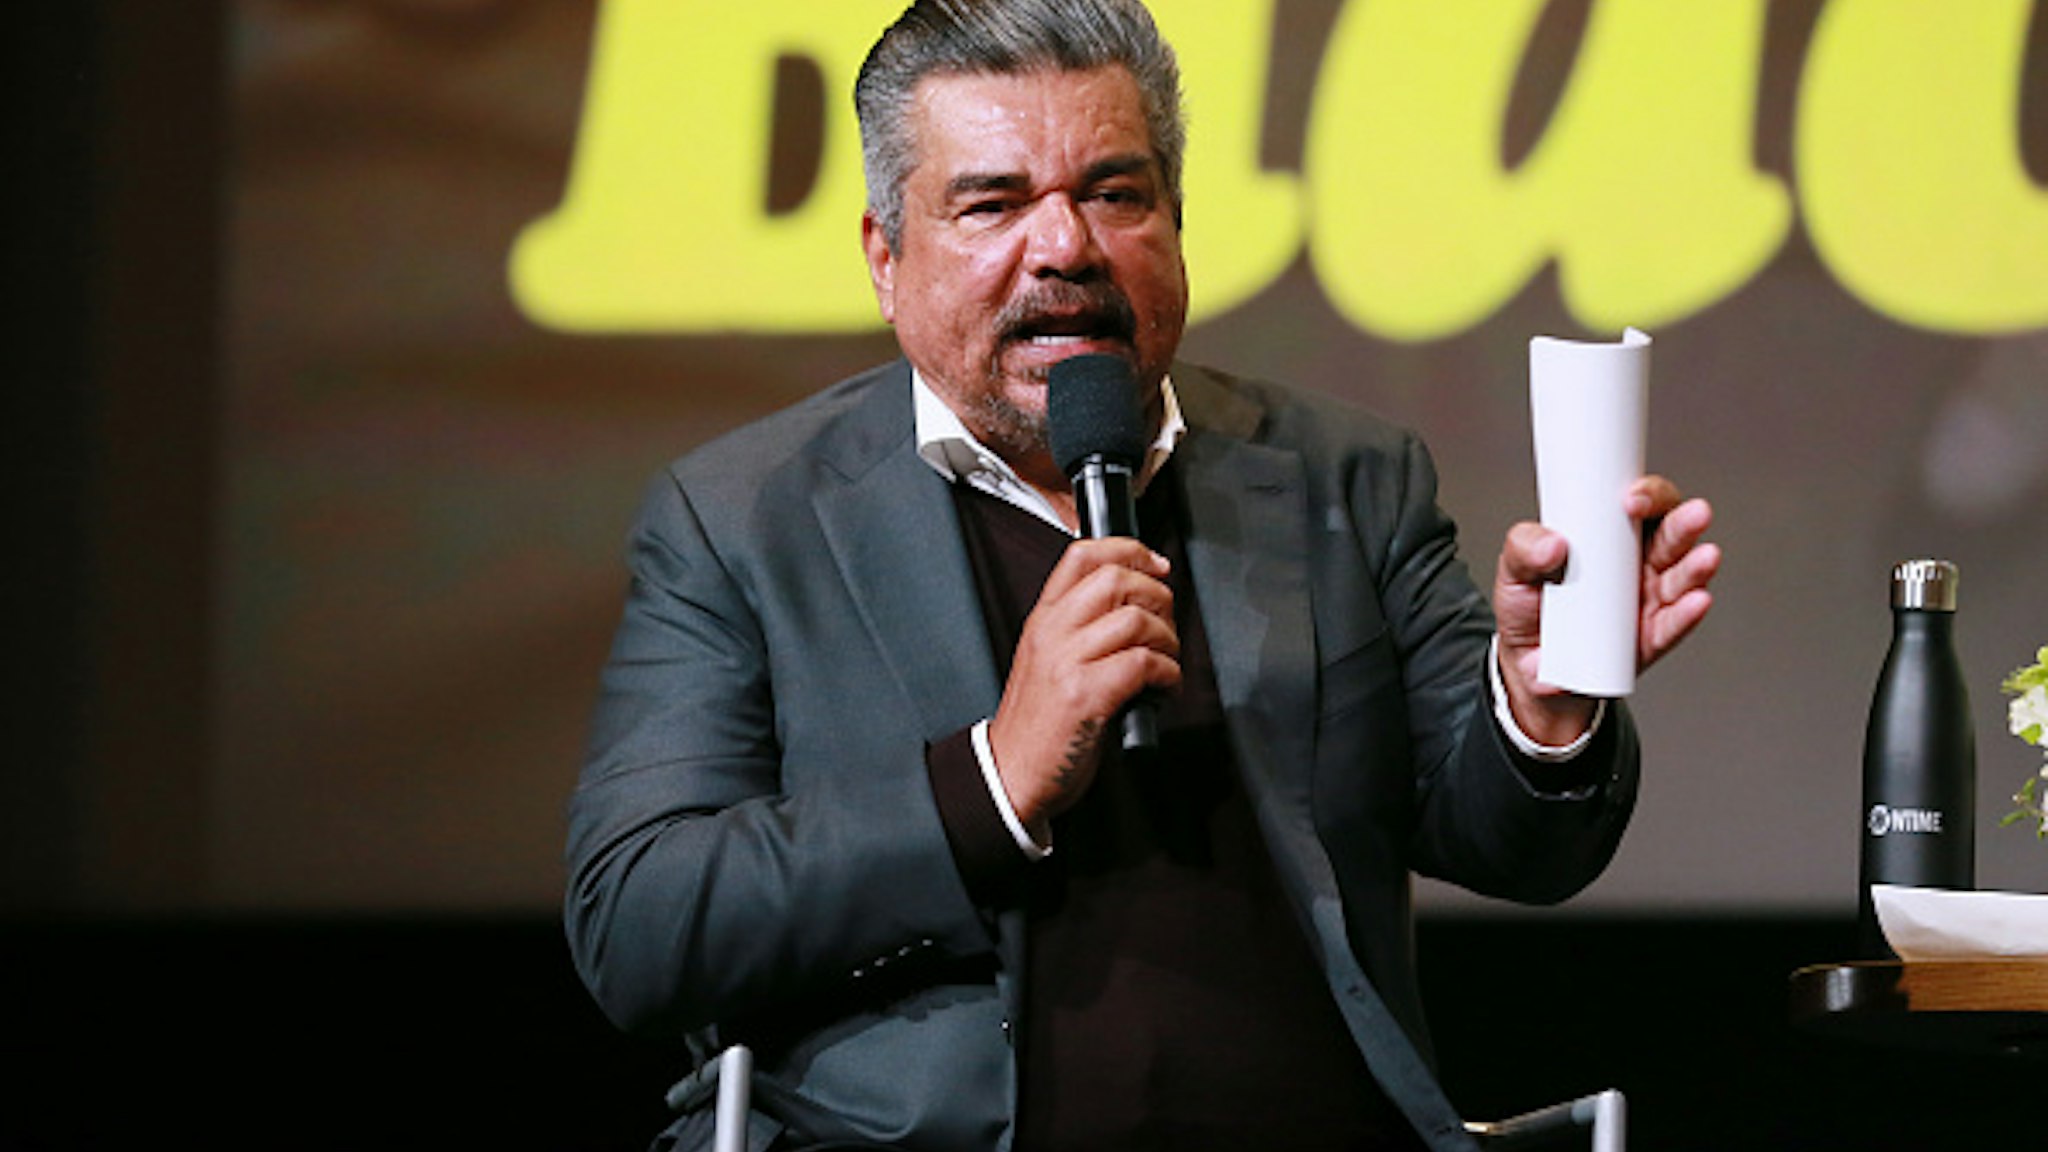 NORTH HOLLYWOOD, CALIFORNIA - MAY 14: George Lopez during the panel discussion at the FYC Red Carpet Event For Showtimes' "Black Monday" at Saban Media Center on May 14, 2019 in North Hollywood, California.